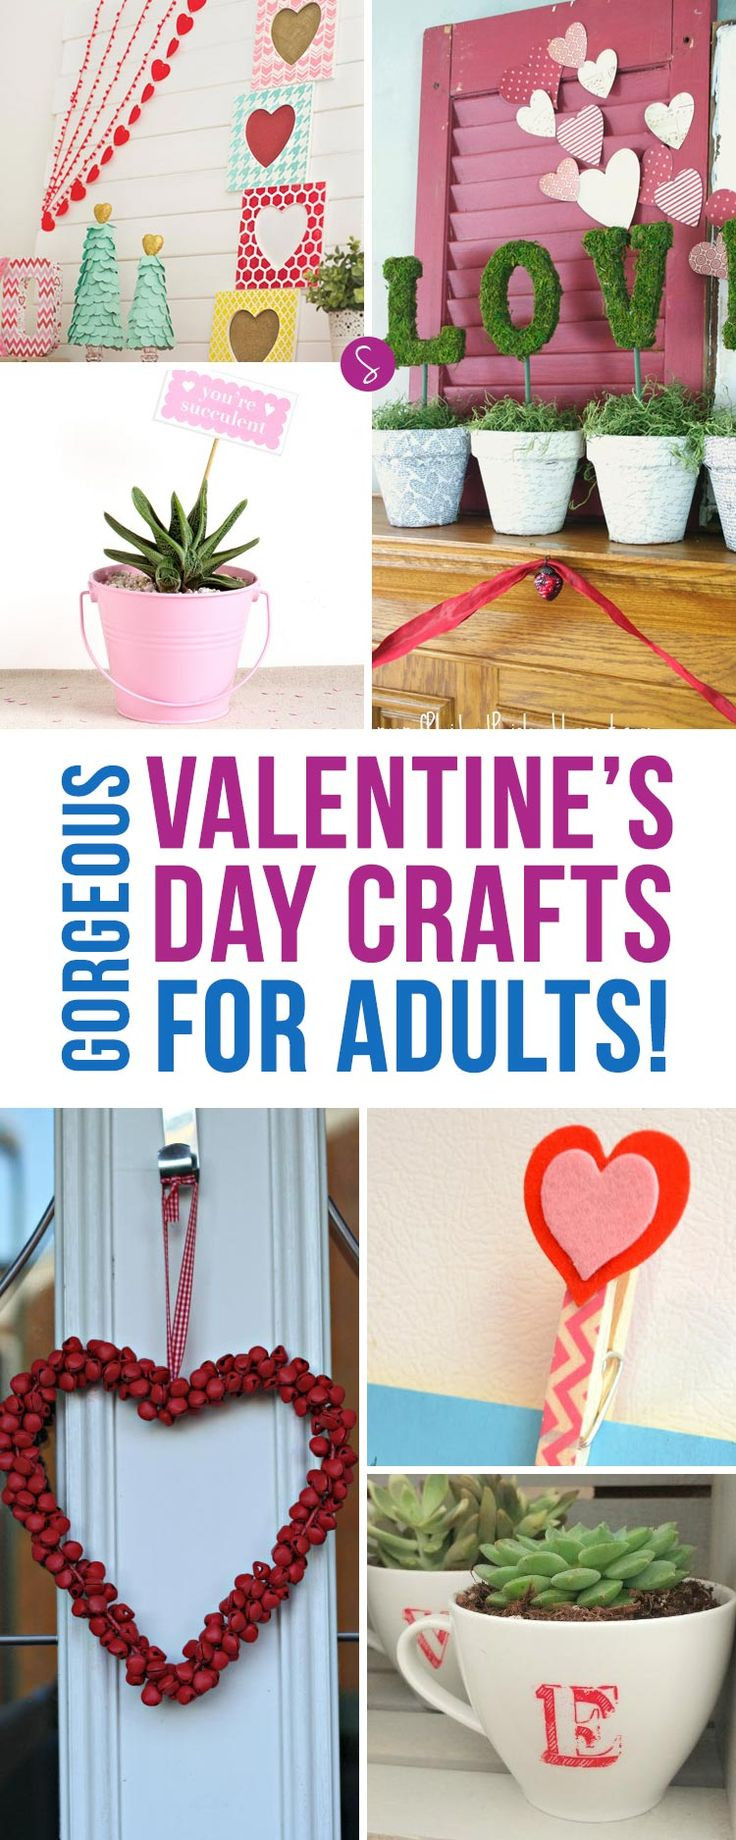 Valentine'S Day Craft Ideas For Adults
 194 best images about Valentines Crafts on Pinterest